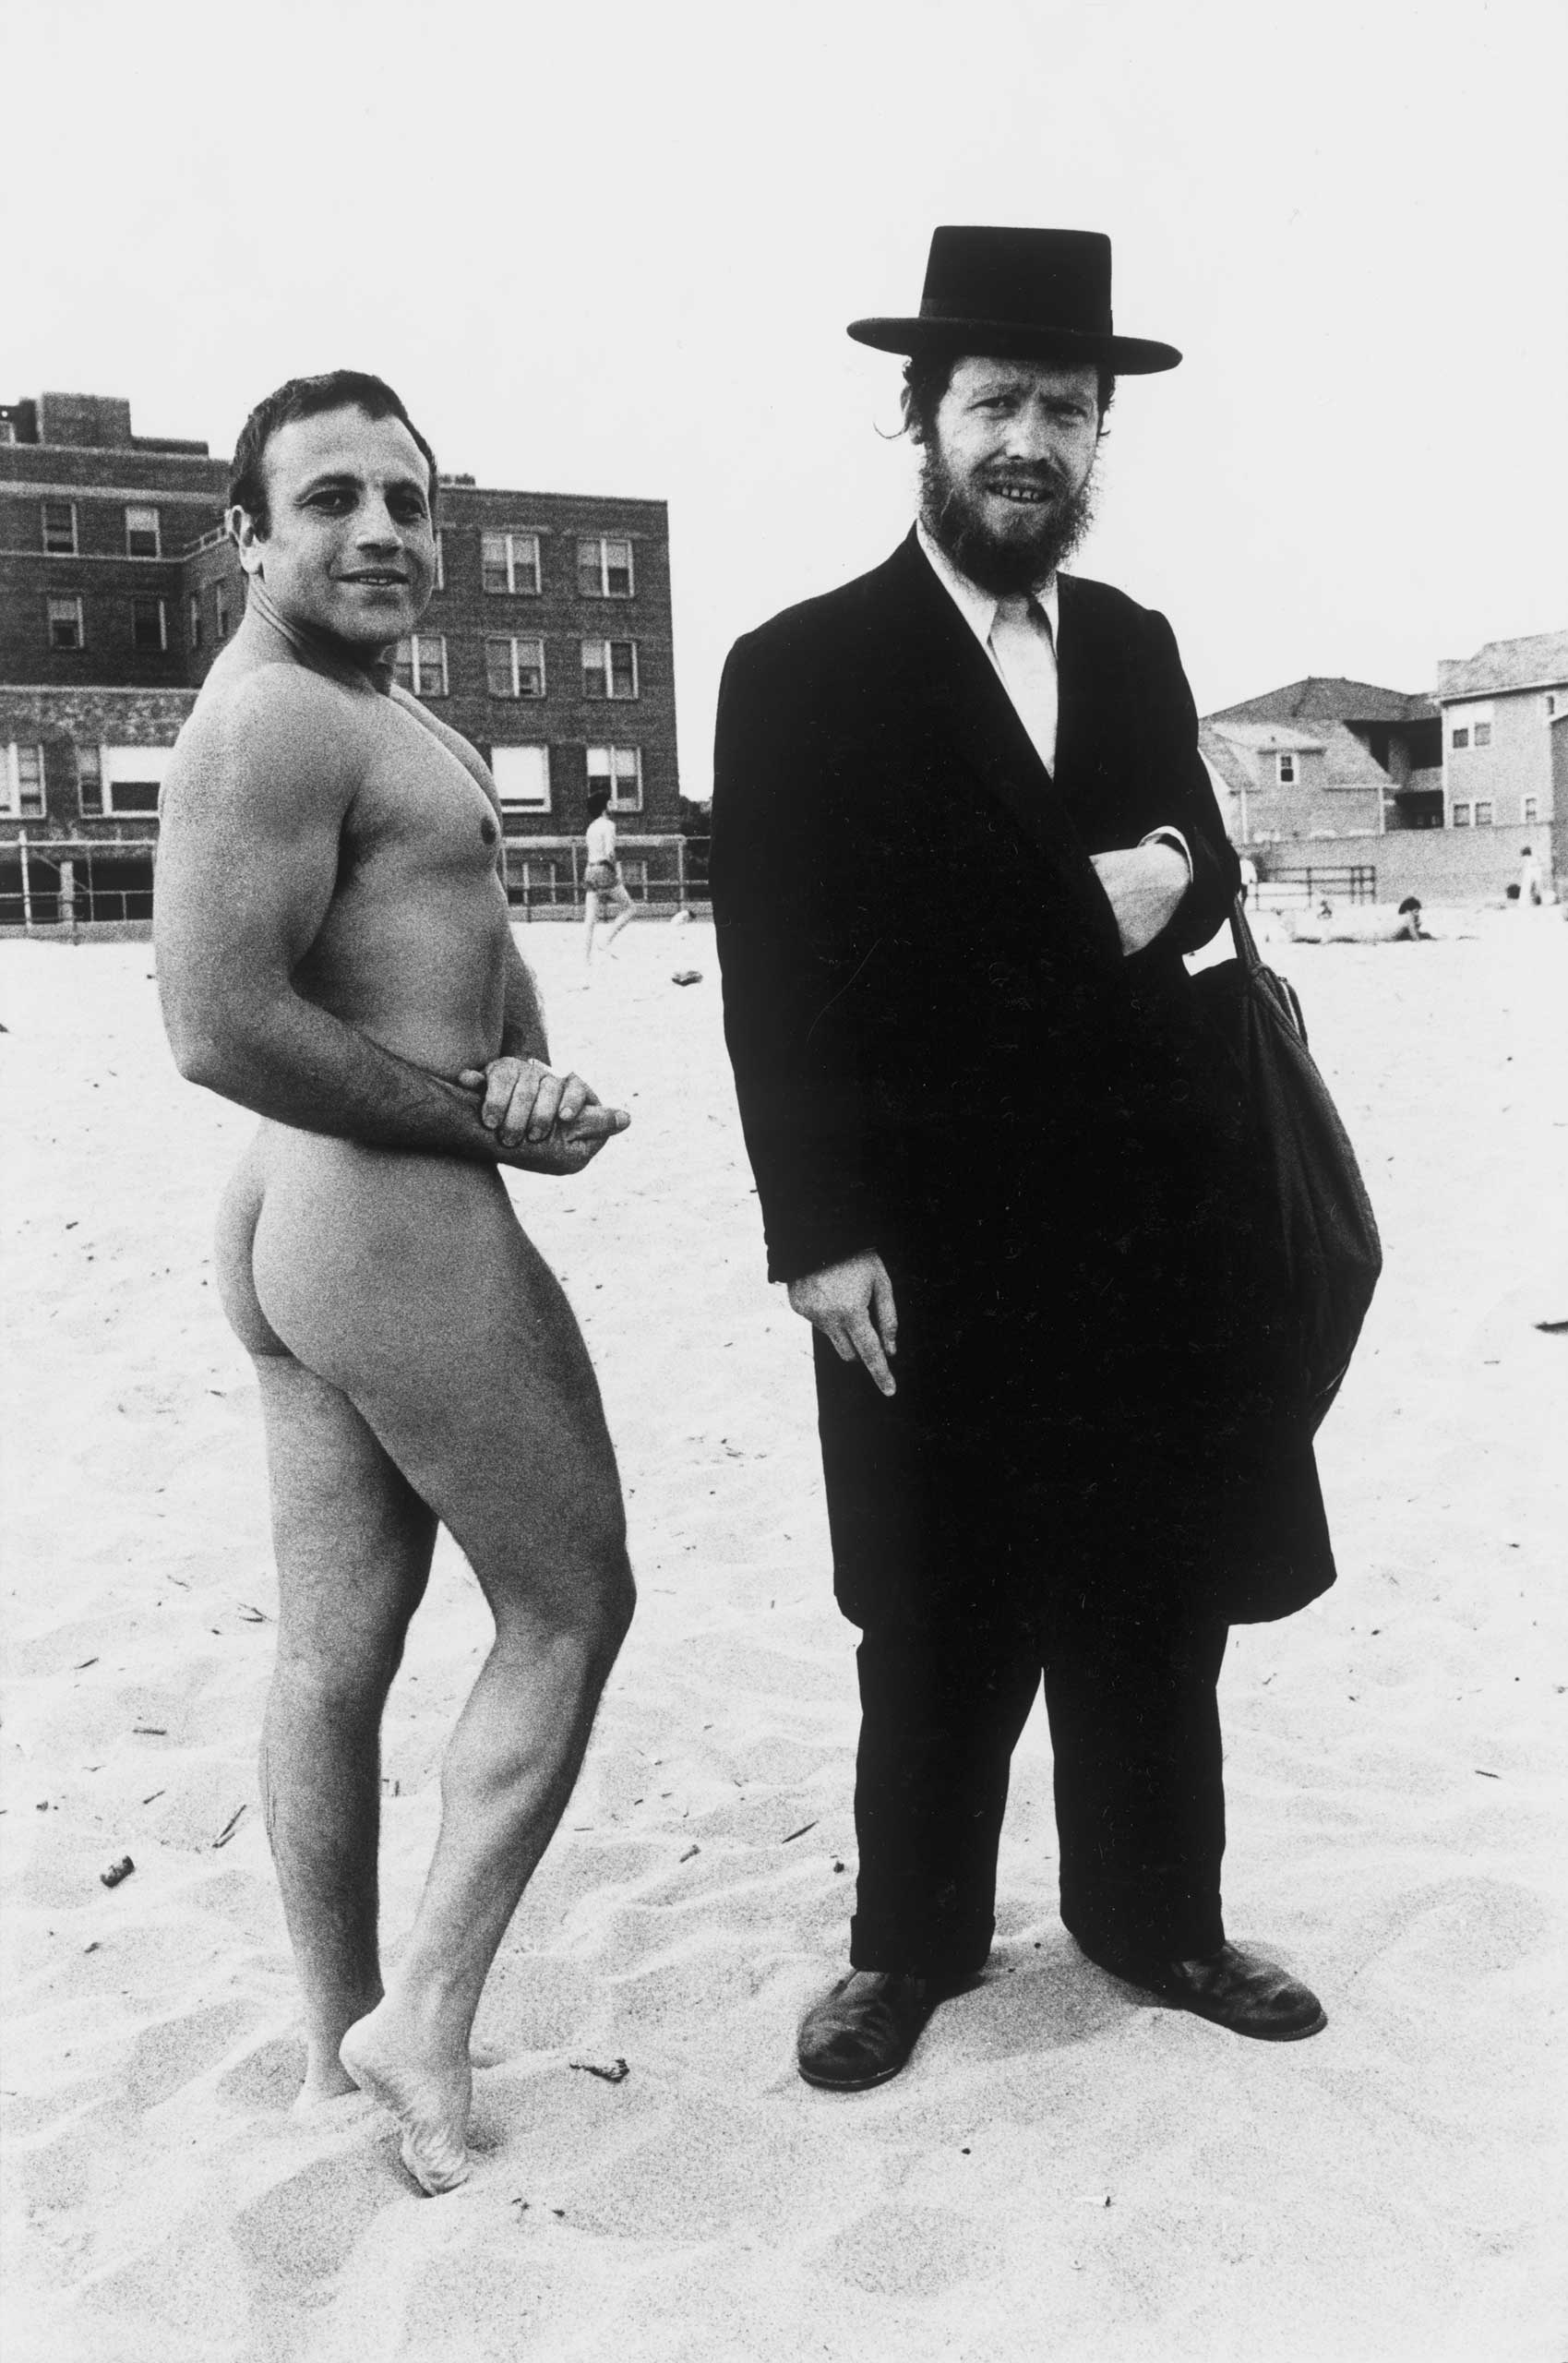 Hassid and Jewish Bodybuilder, 1980"The man showed up on Riis beach when there still was a nude bay and all the people started gathering around him. A nude man walks up to him and says take my picture with him becuase I am Jewish too!"